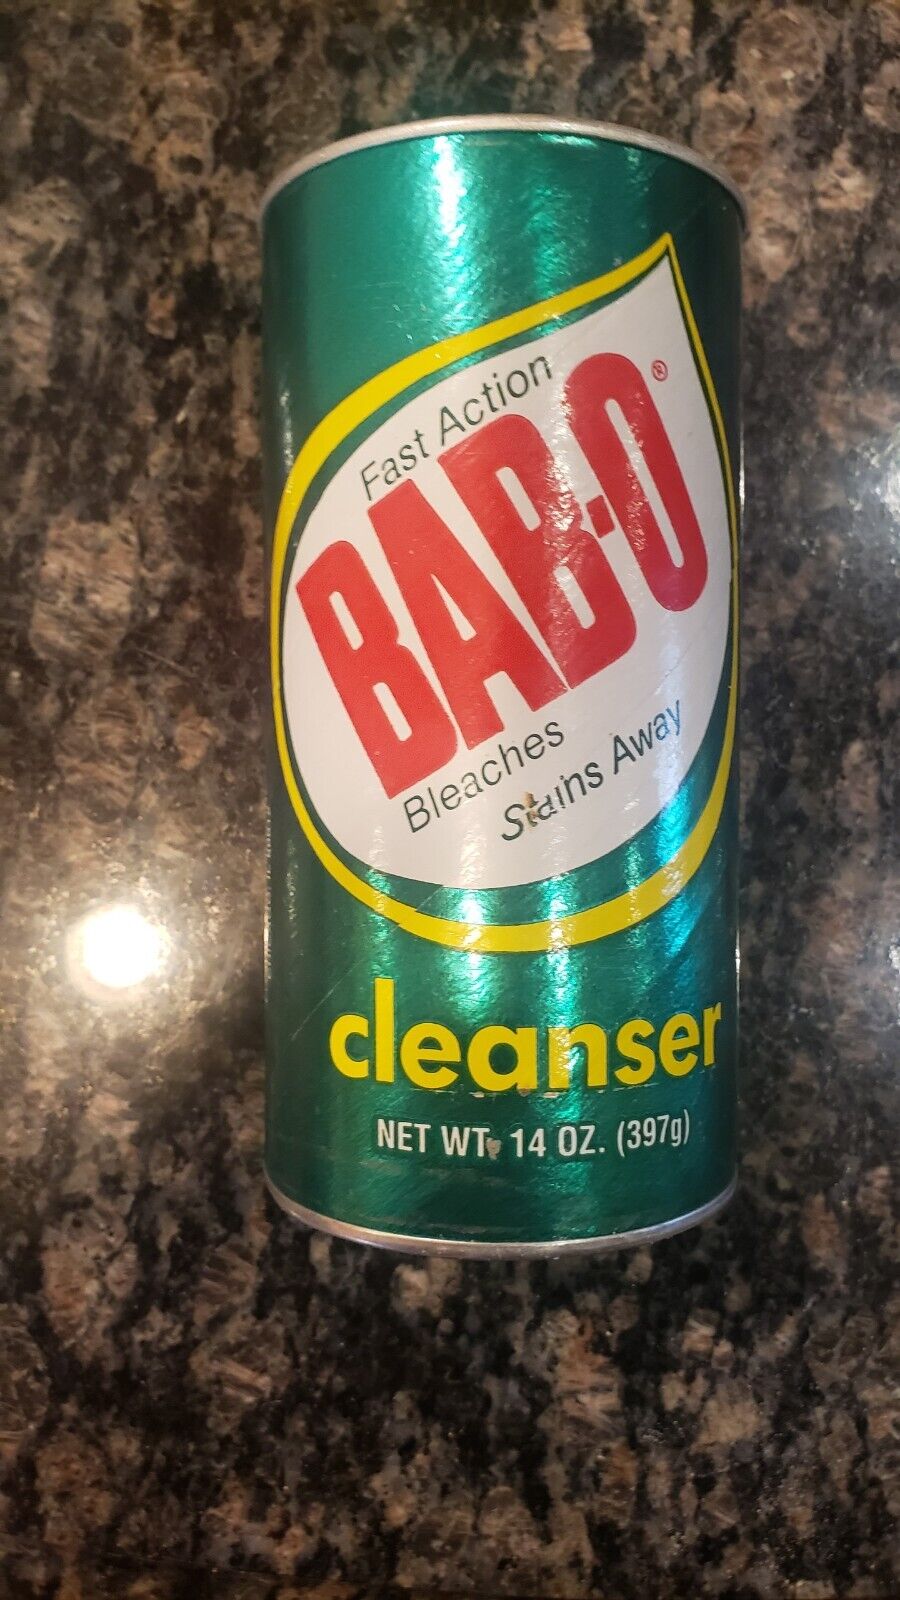 Vintage BAB-O Cleanser Bleached Stains Dated 3-9-95.